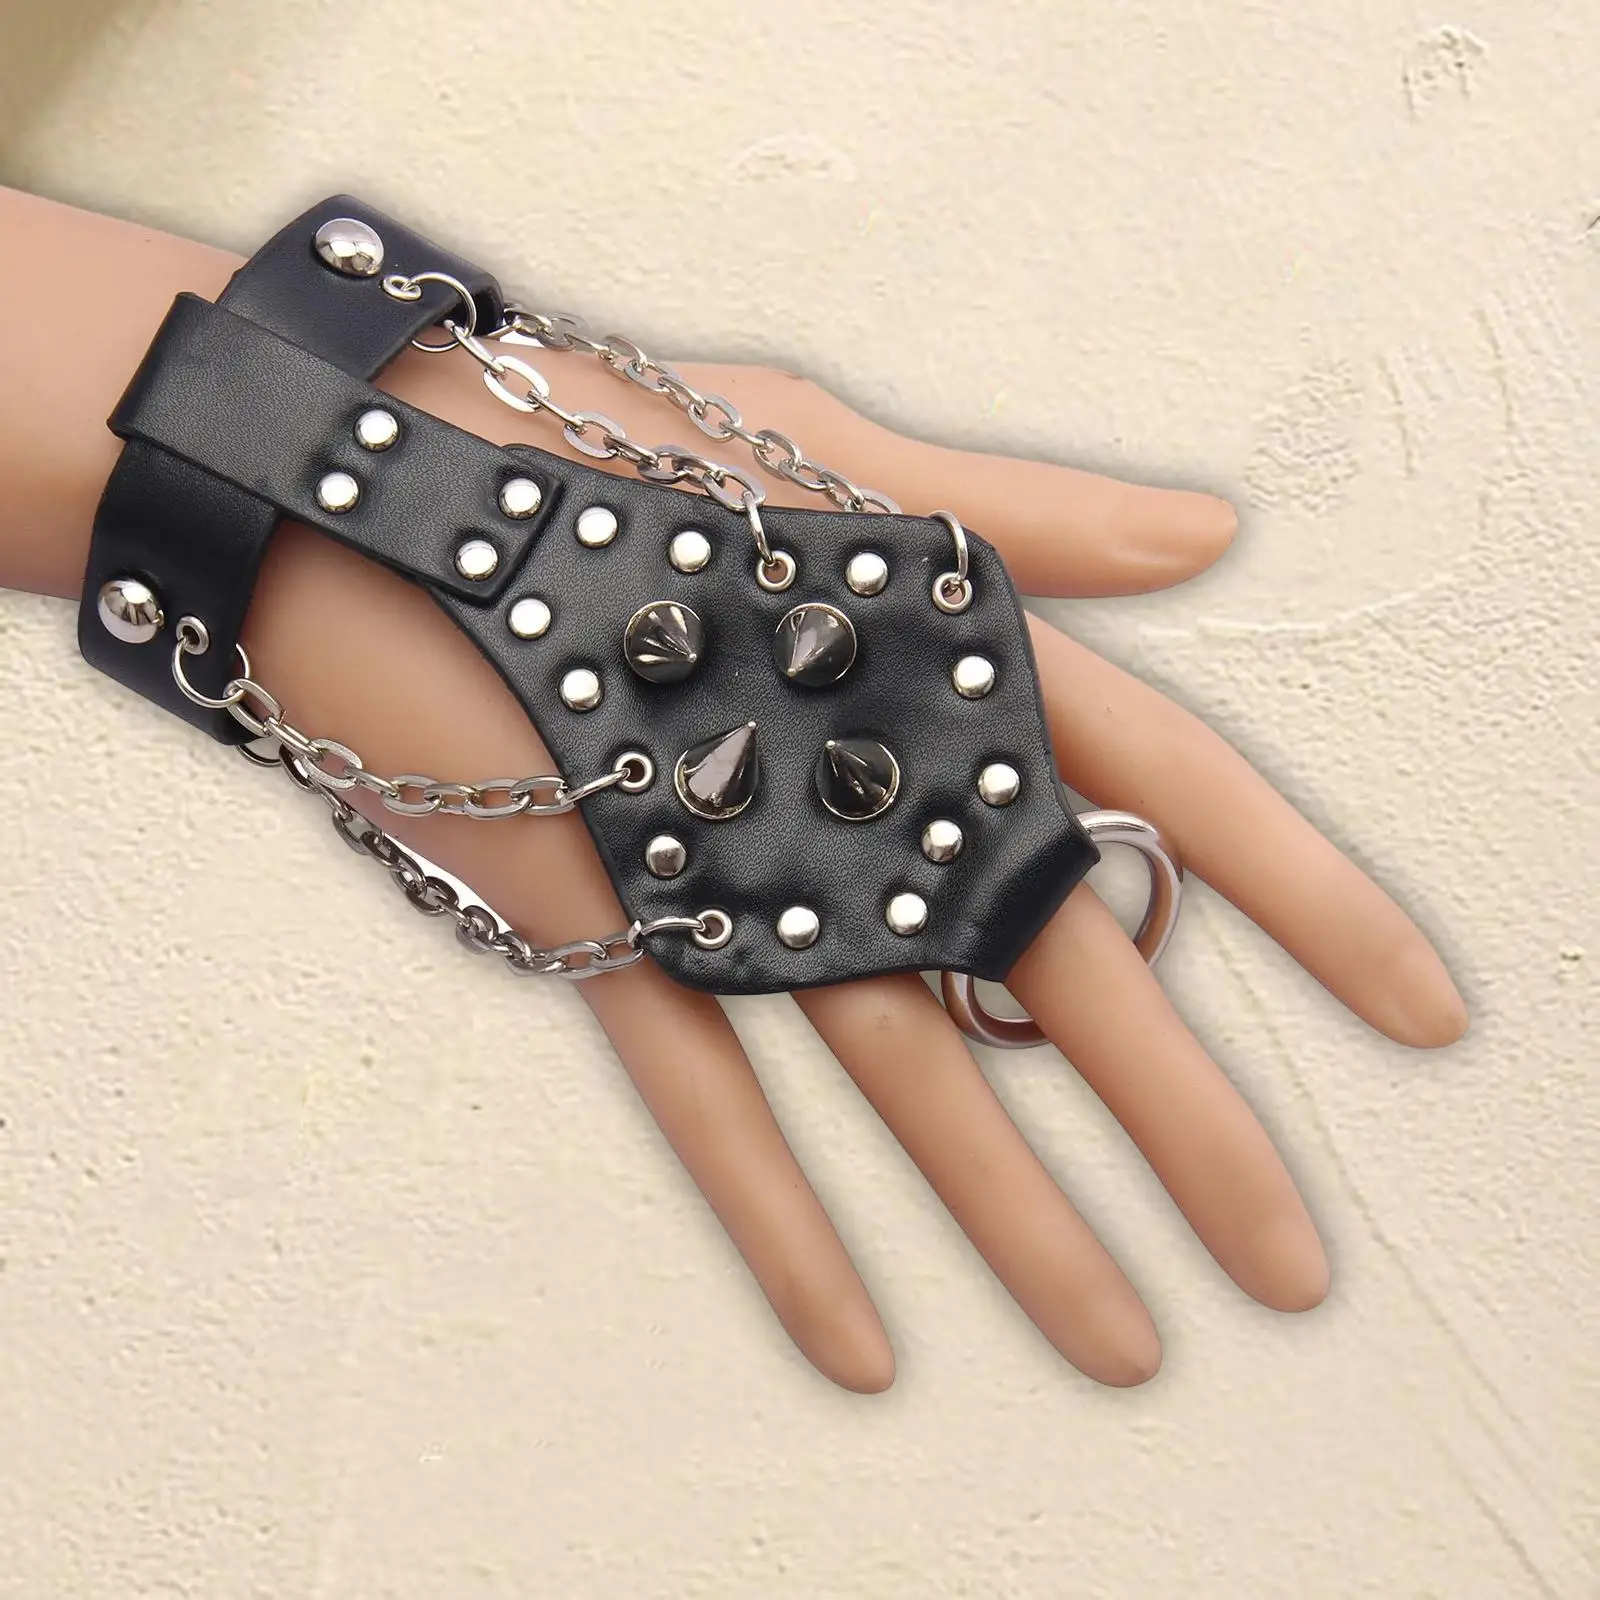 Gothic Gloves Costume Accessories Men Women Hand Accessories Bracelet Punk Stud Gloves for Photo Props Role Playing Decoration